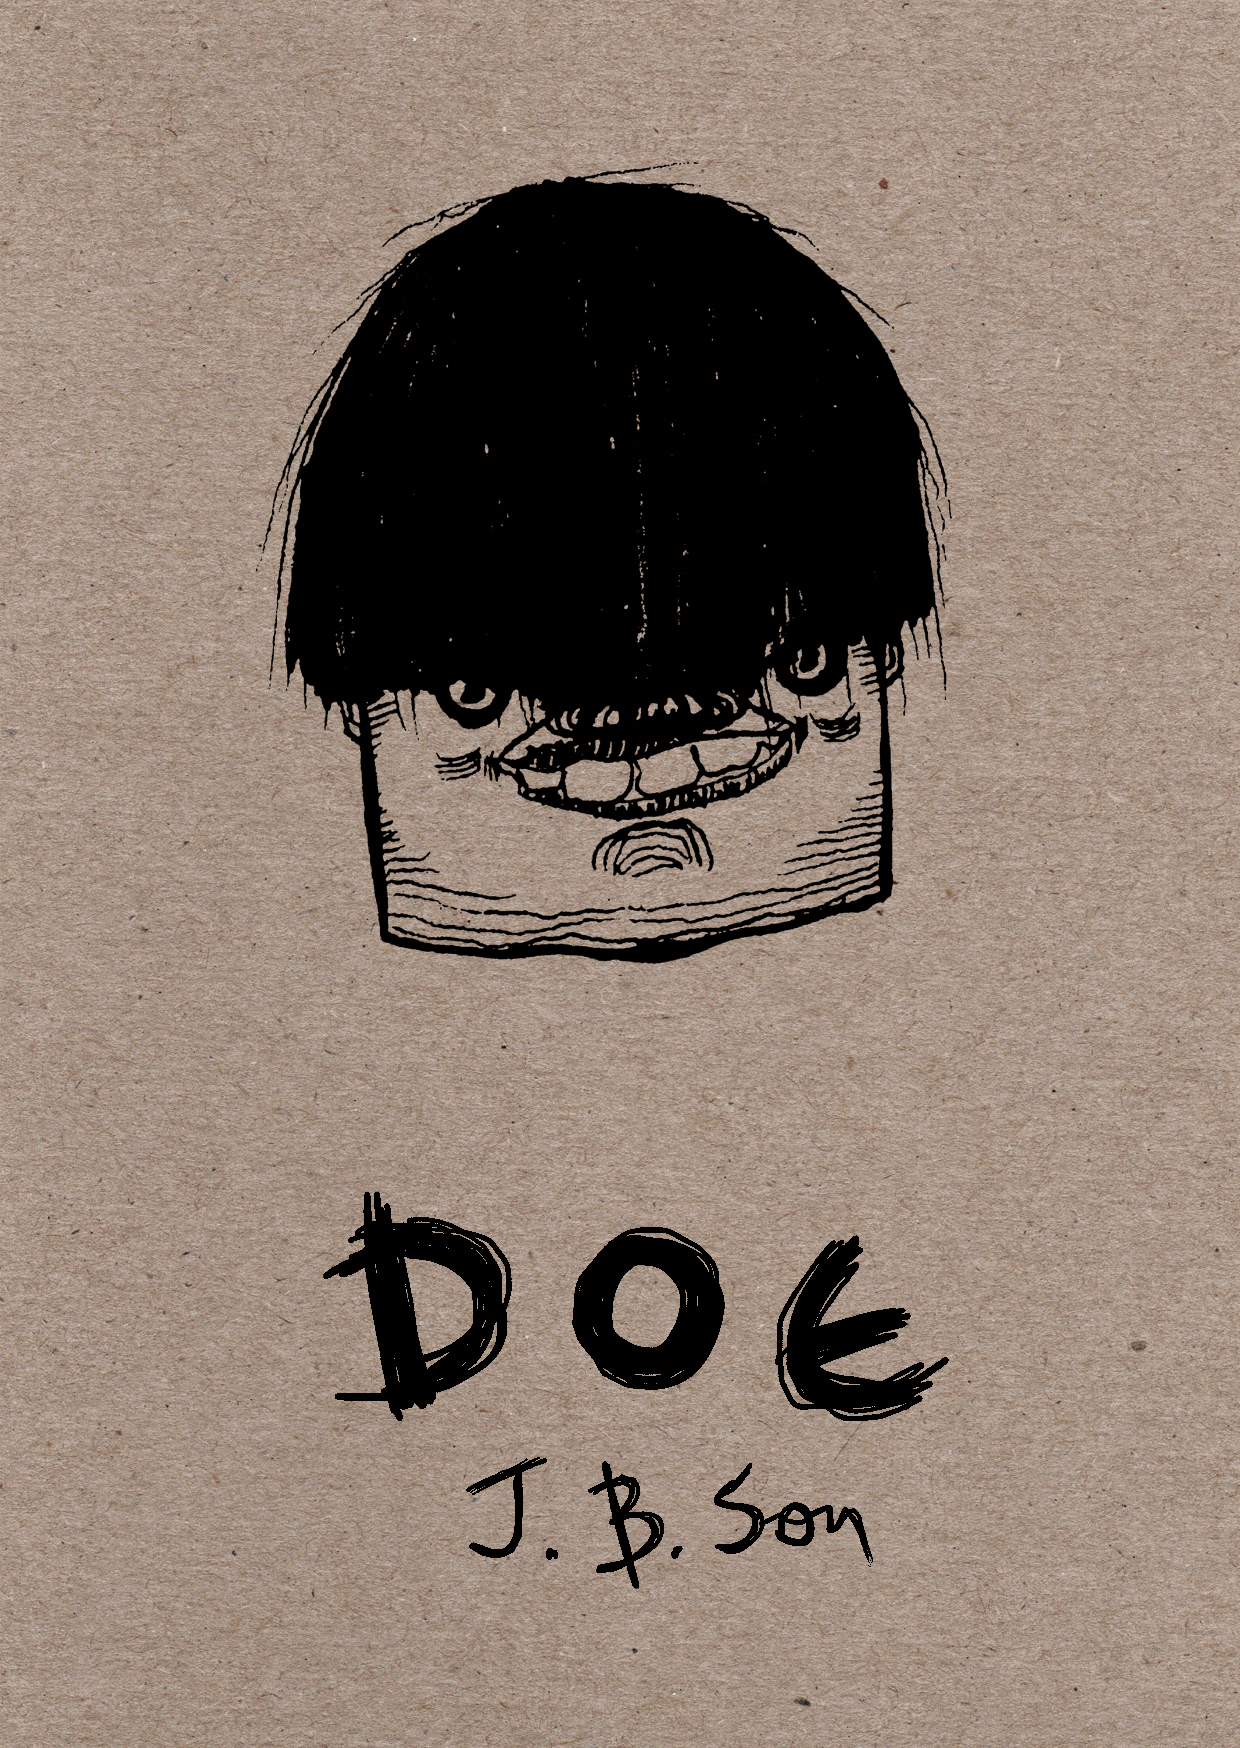 DOE_cover_1748x1240px